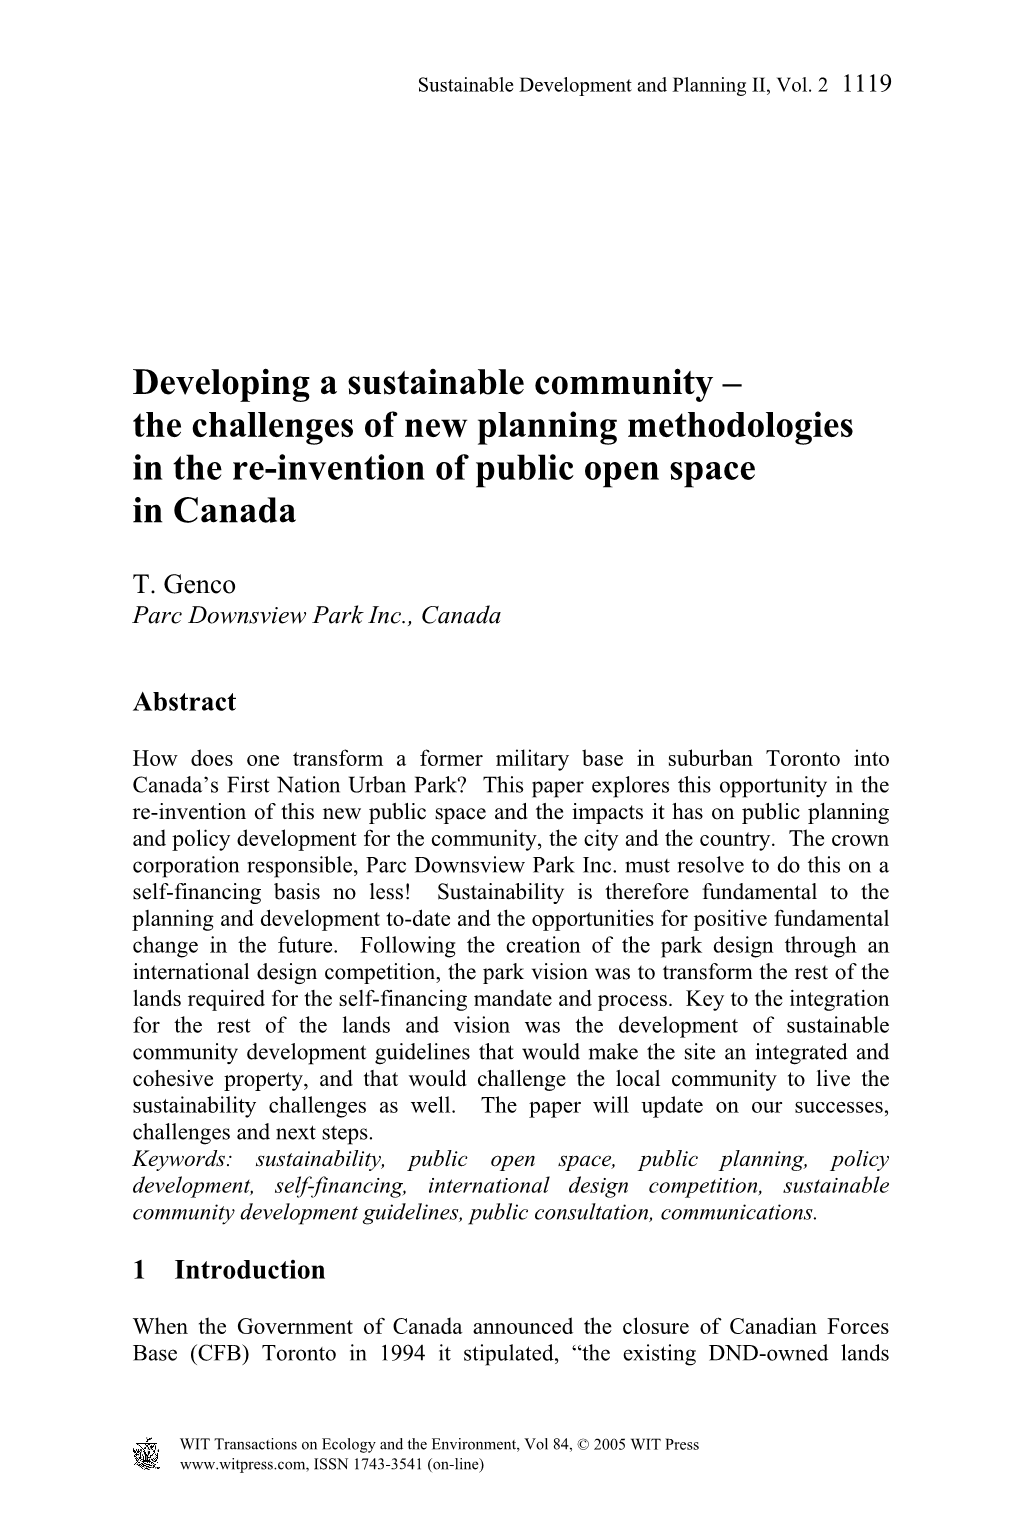 Developing a Sustainable Community – the Challenges of New Planning Methodologies in the Re-Invention of Public Open Space in Canada